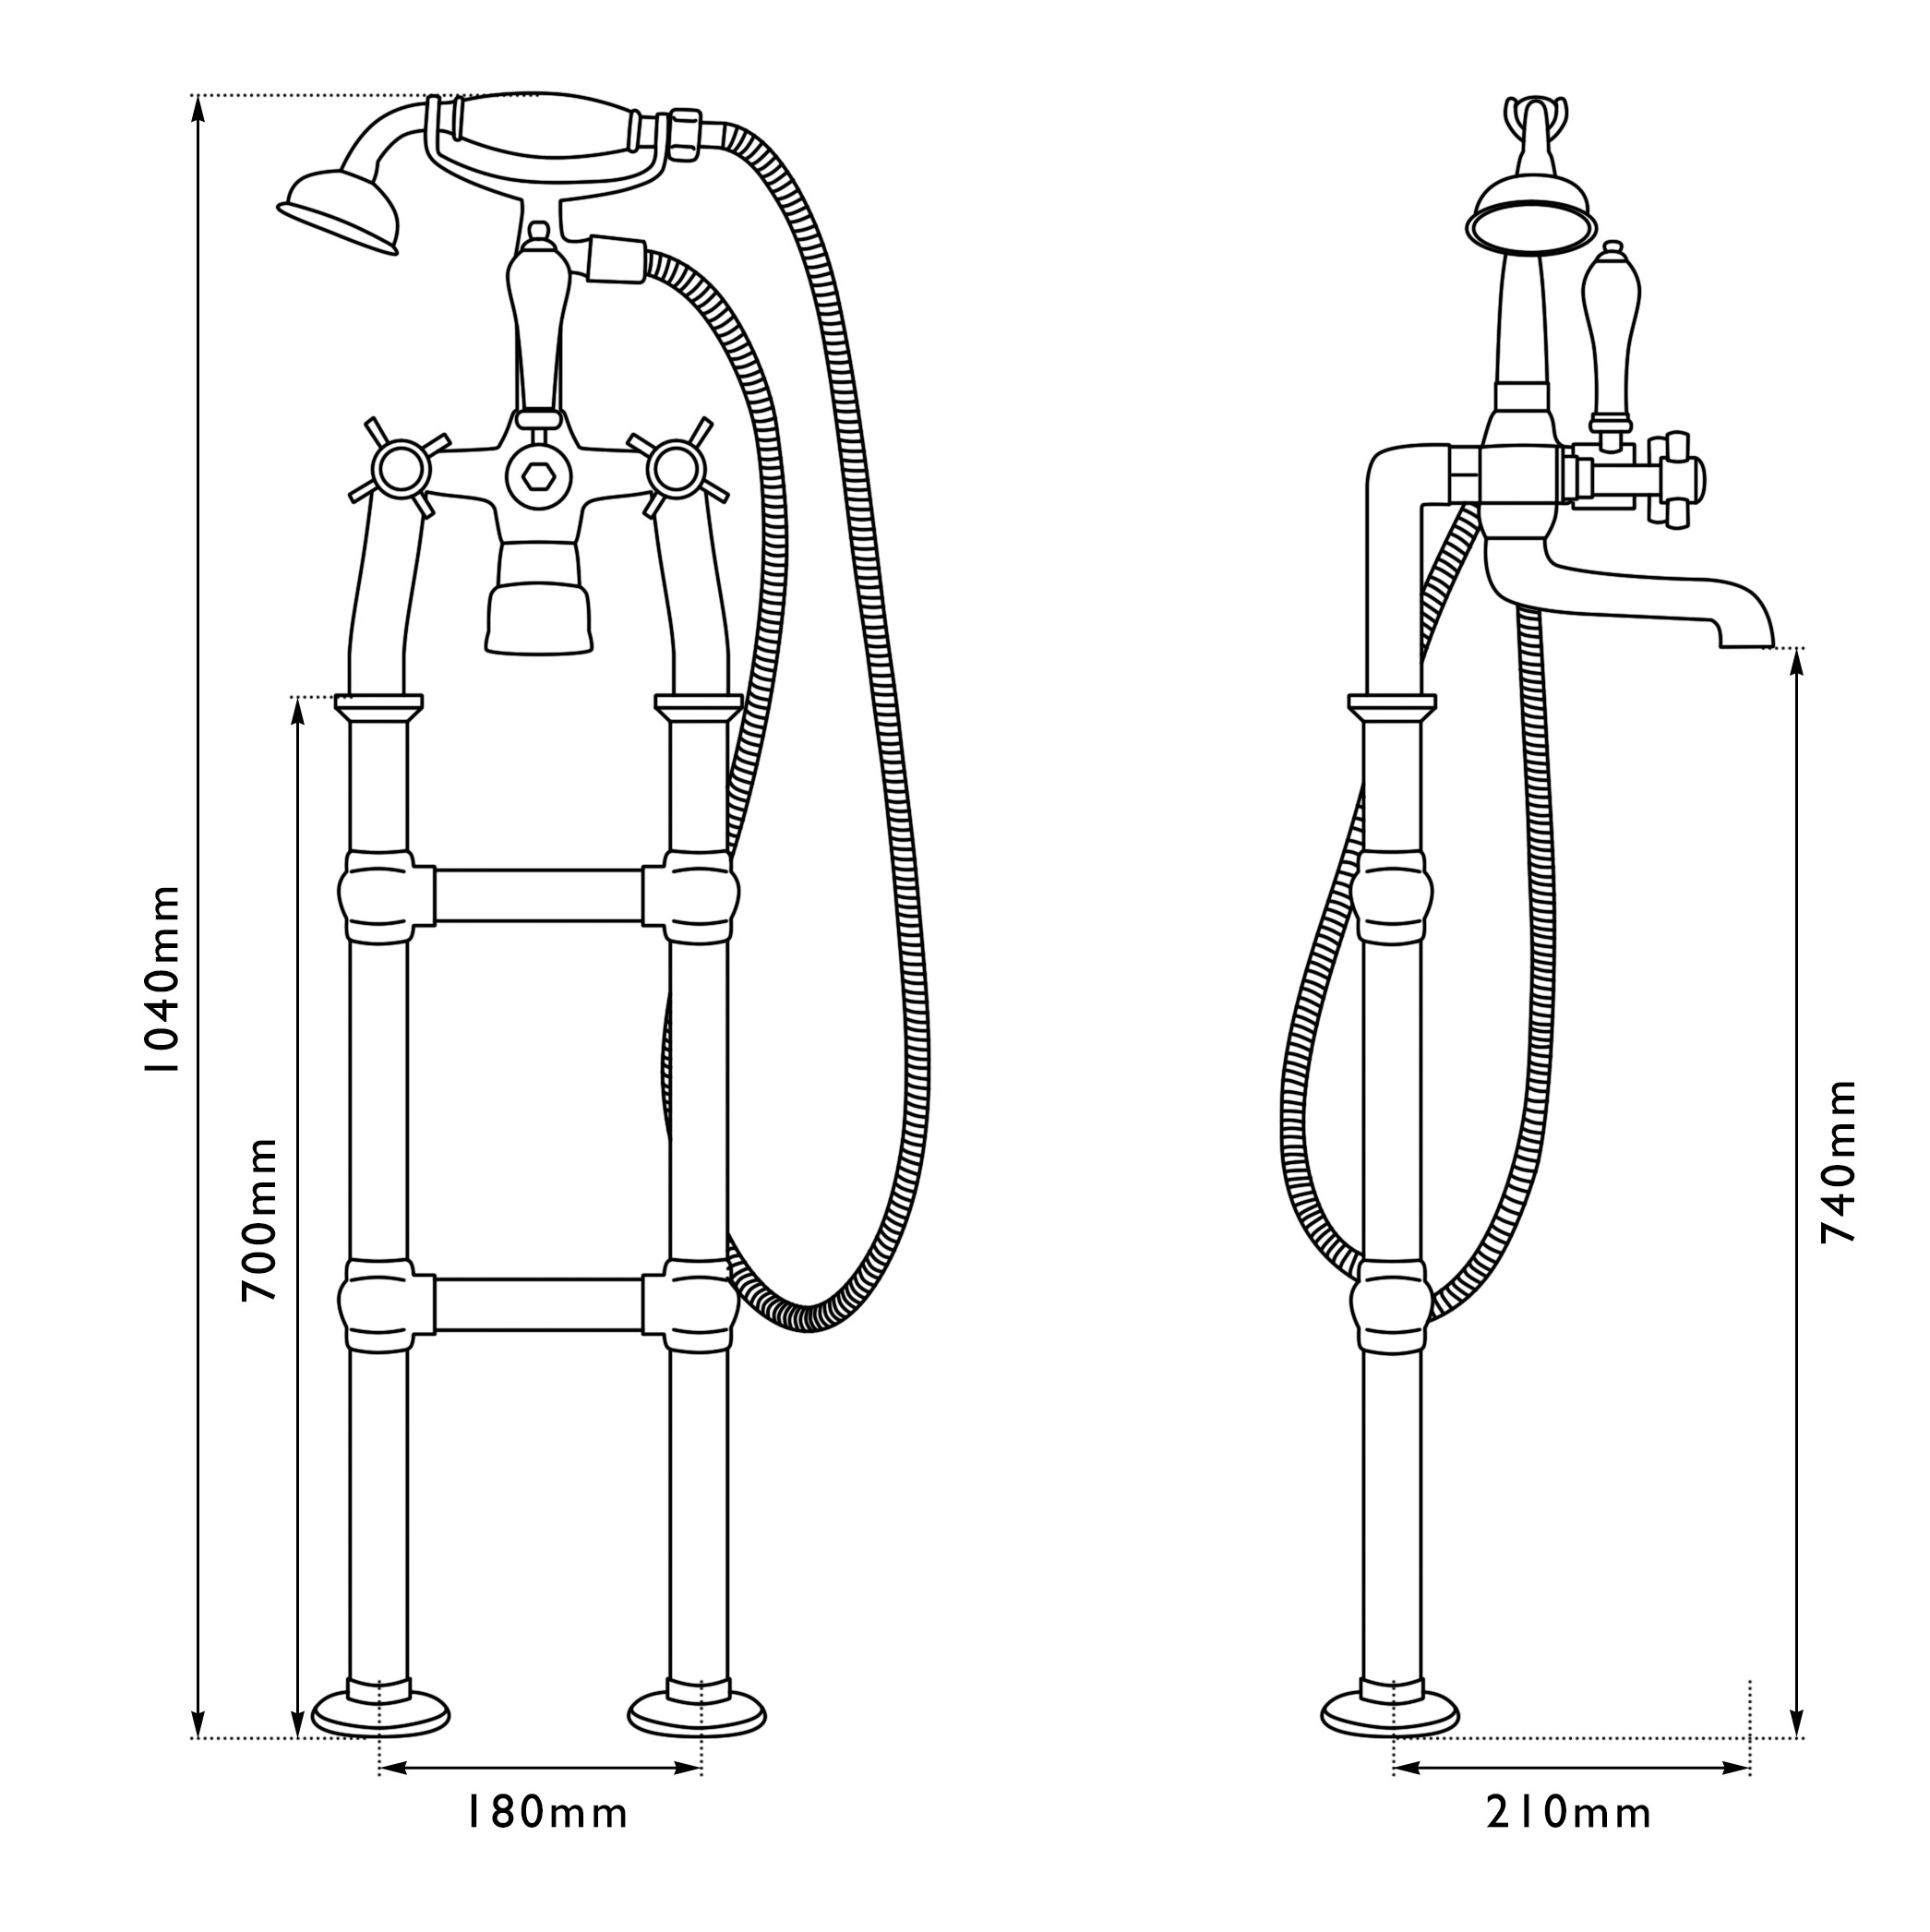 Dimensions Of Hurlingham Freestanding Bath Mixer Taps With Shower Head